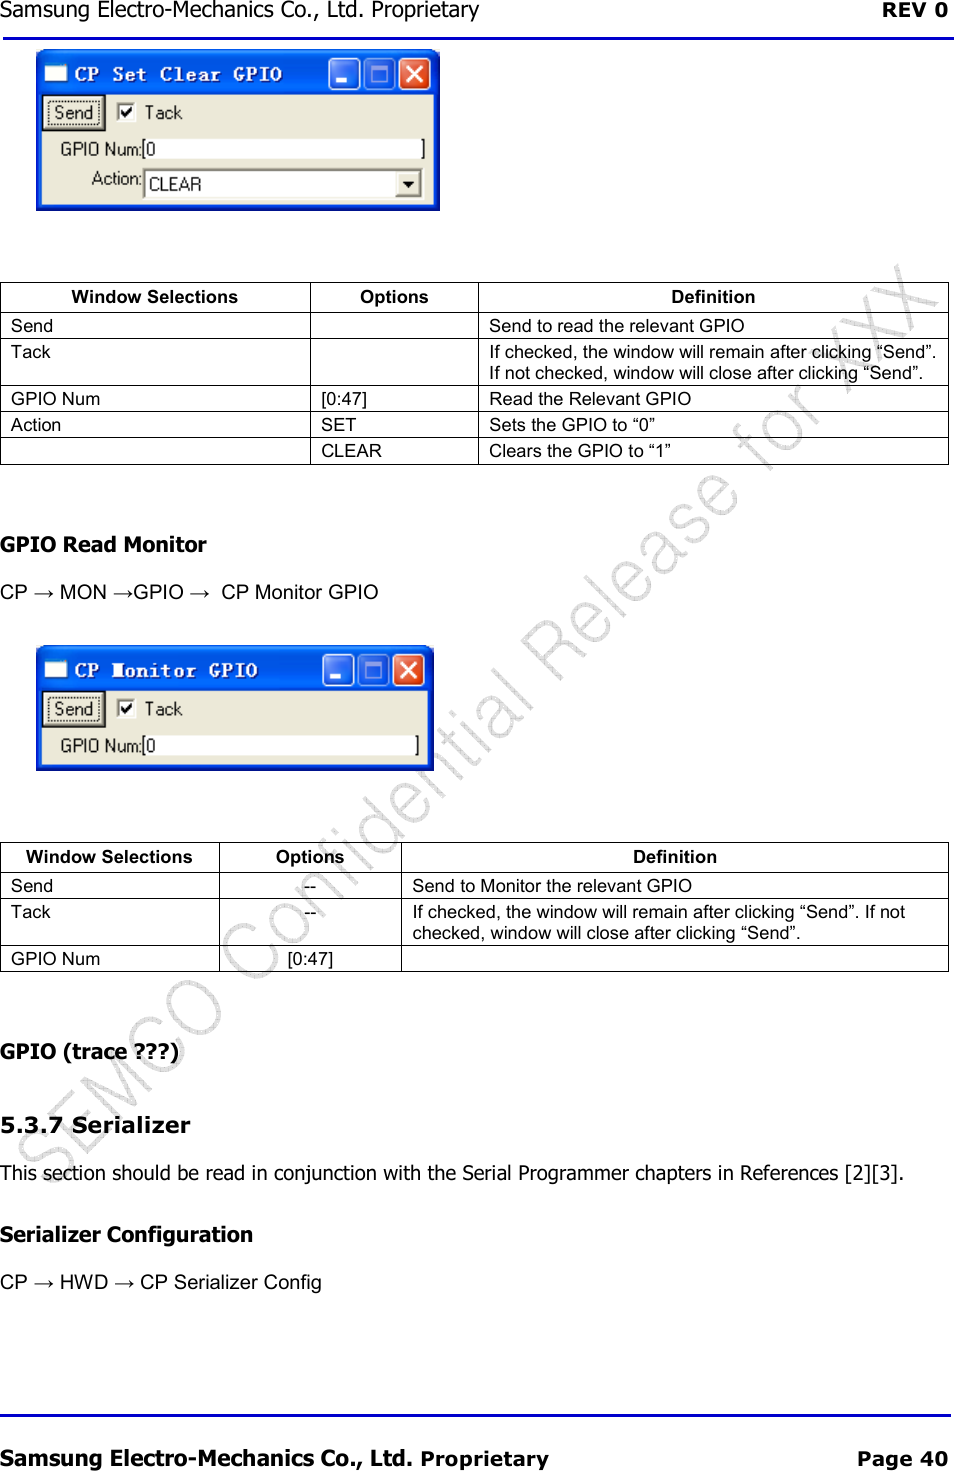 Samsung Electro-Mechanics Co., Ltd. Proprietary  REV 0 Samsung Electro-Mechanics Co., Ltd. Proprietary  Page 40   Window Selections  Options  Definition Send    Send to read the relevant GPIO Tack    If checked, the window will remain after clicking “Send”. If not checked, window will close after clicking “Send”. GPIO Num  [0:47]  Read the Relevant GPIO Action  SET  Sets the GPIO to “0”   CLEAR  Clears the GPIO to “1”  GPIO Read Monitor CP → MON →GPIO →  CP Monitor GPIO   Window Selections  Options  Definition Send  --  Send to Monitor the relevant GPIO Tack  --  If checked, the window will remain after clicking “Send”. If not checked, window will close after clicking “Send”. GPIO Num  [0:47]    GPIO (trace ???) 5.3.7  Serializer This section should be read in conjunction with the Serial Programmer chapters in References [2][3]. Serializer Configuration CP → HWD → CP Serializer Config 